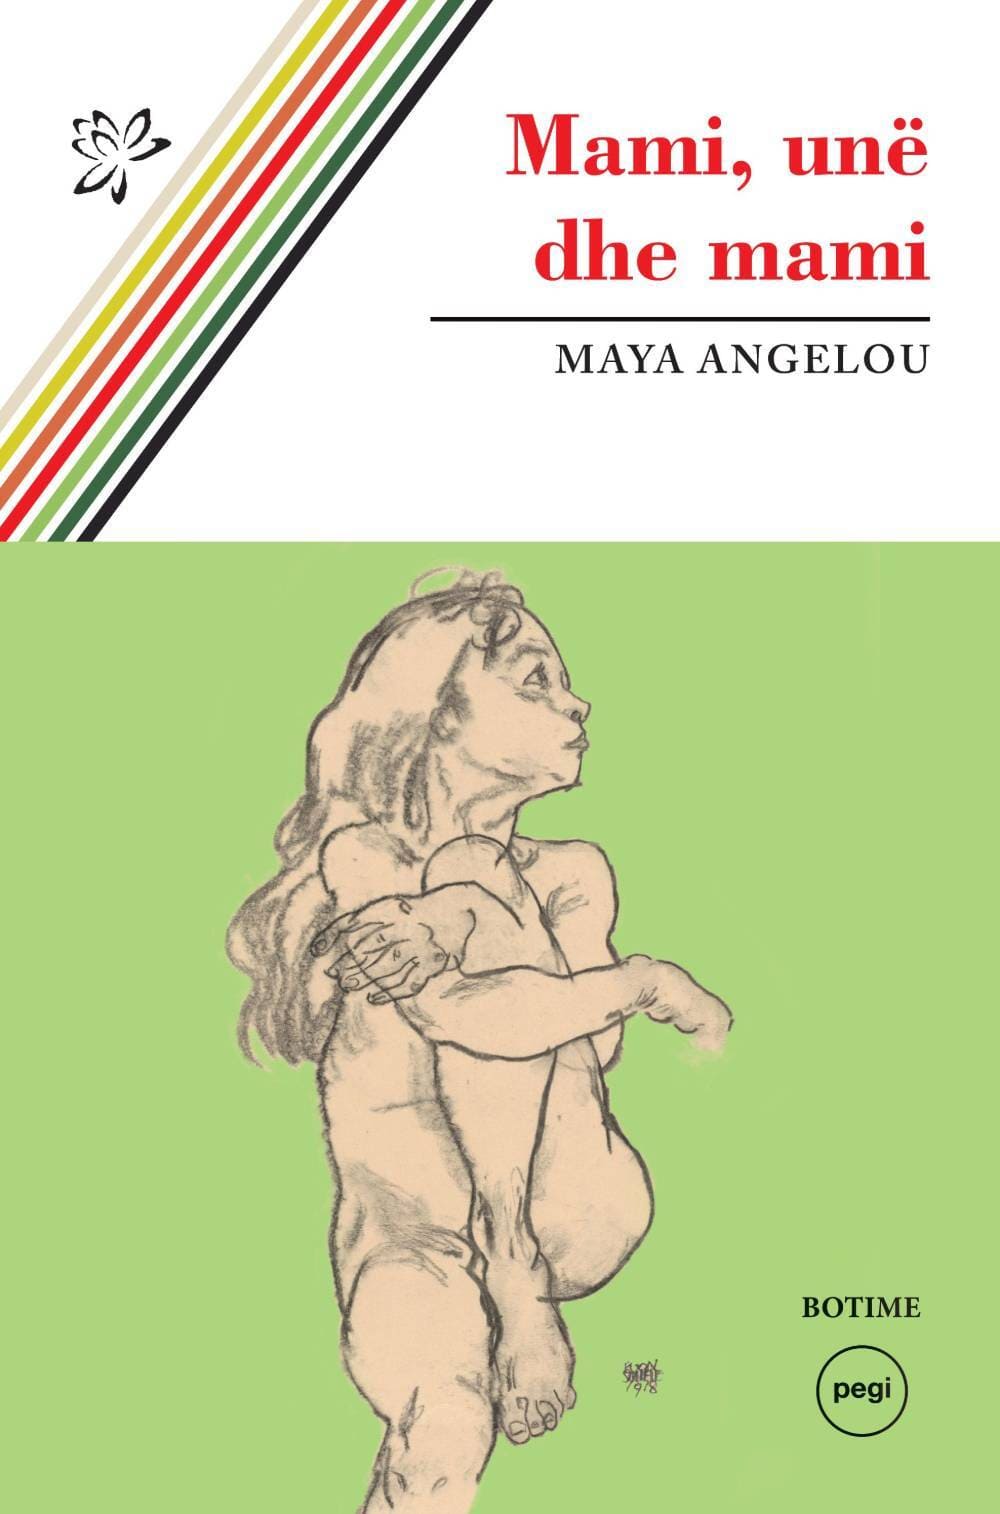 images/book-images/mami-une-dhe-mami.jpg